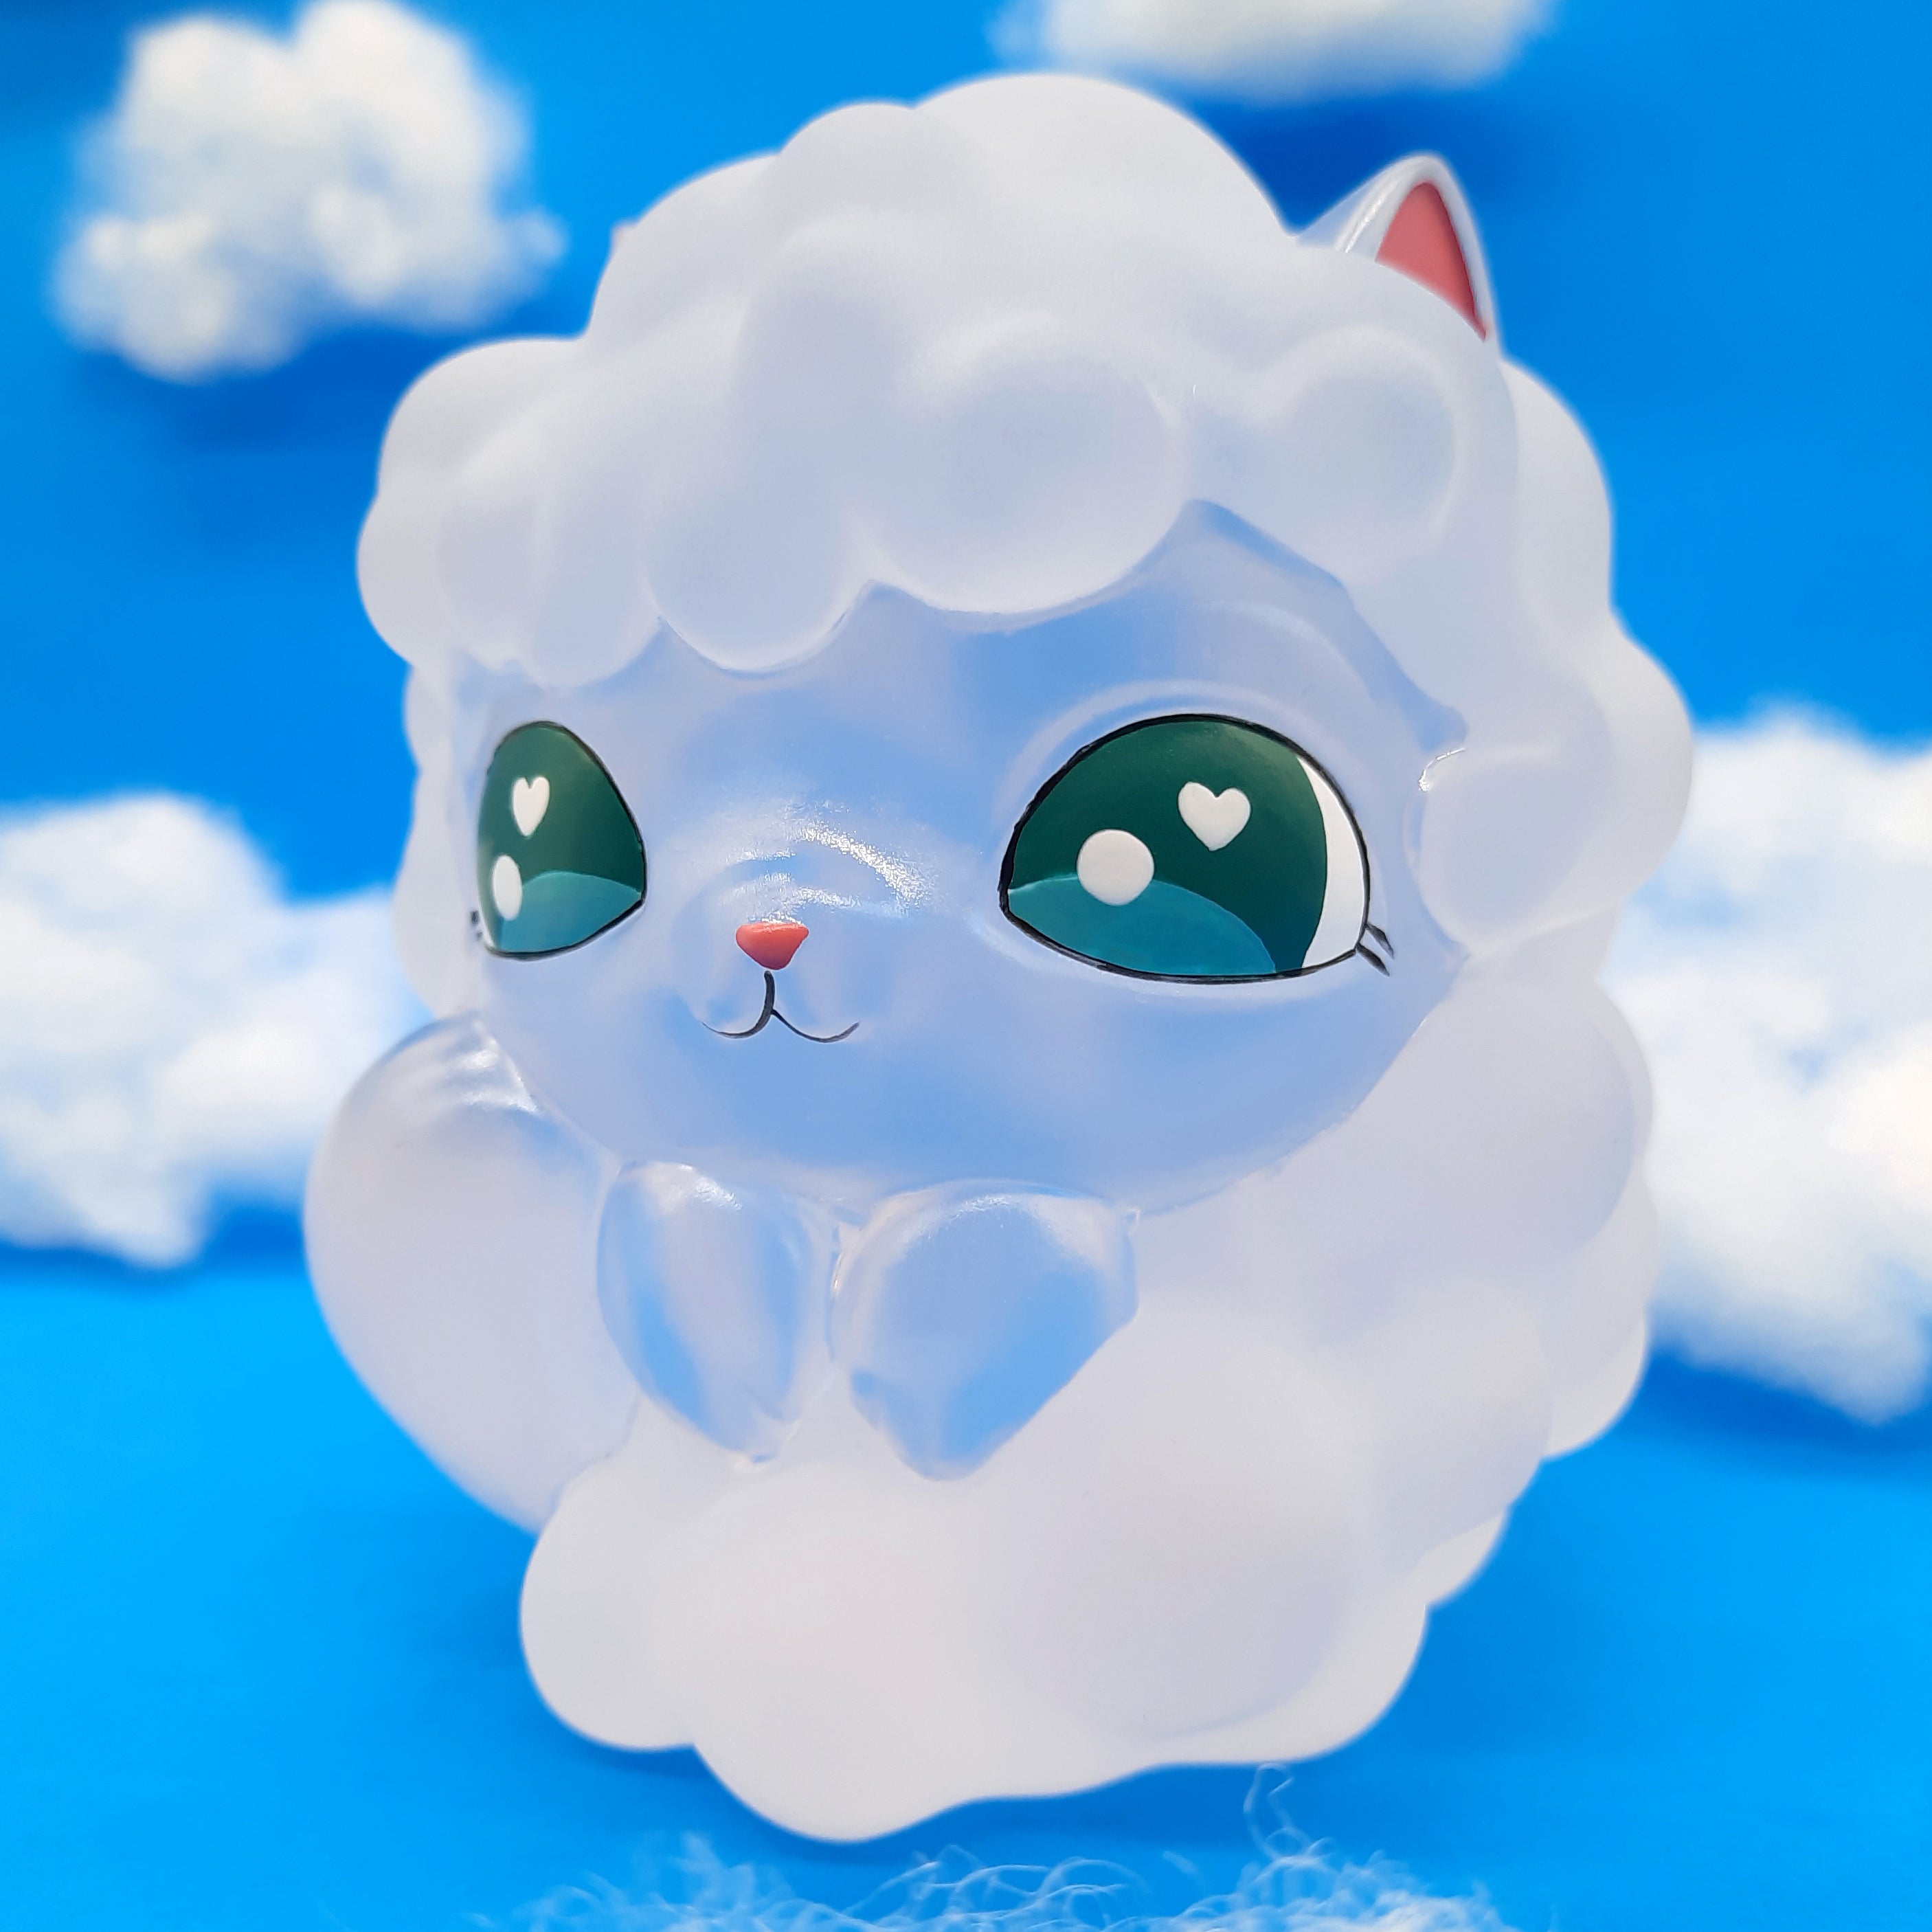 Kumo Kitty, a 4-inch tall high-grade resin toy, depicts a cartoon animal figure with heart details. Limited edition of 50 pieces.